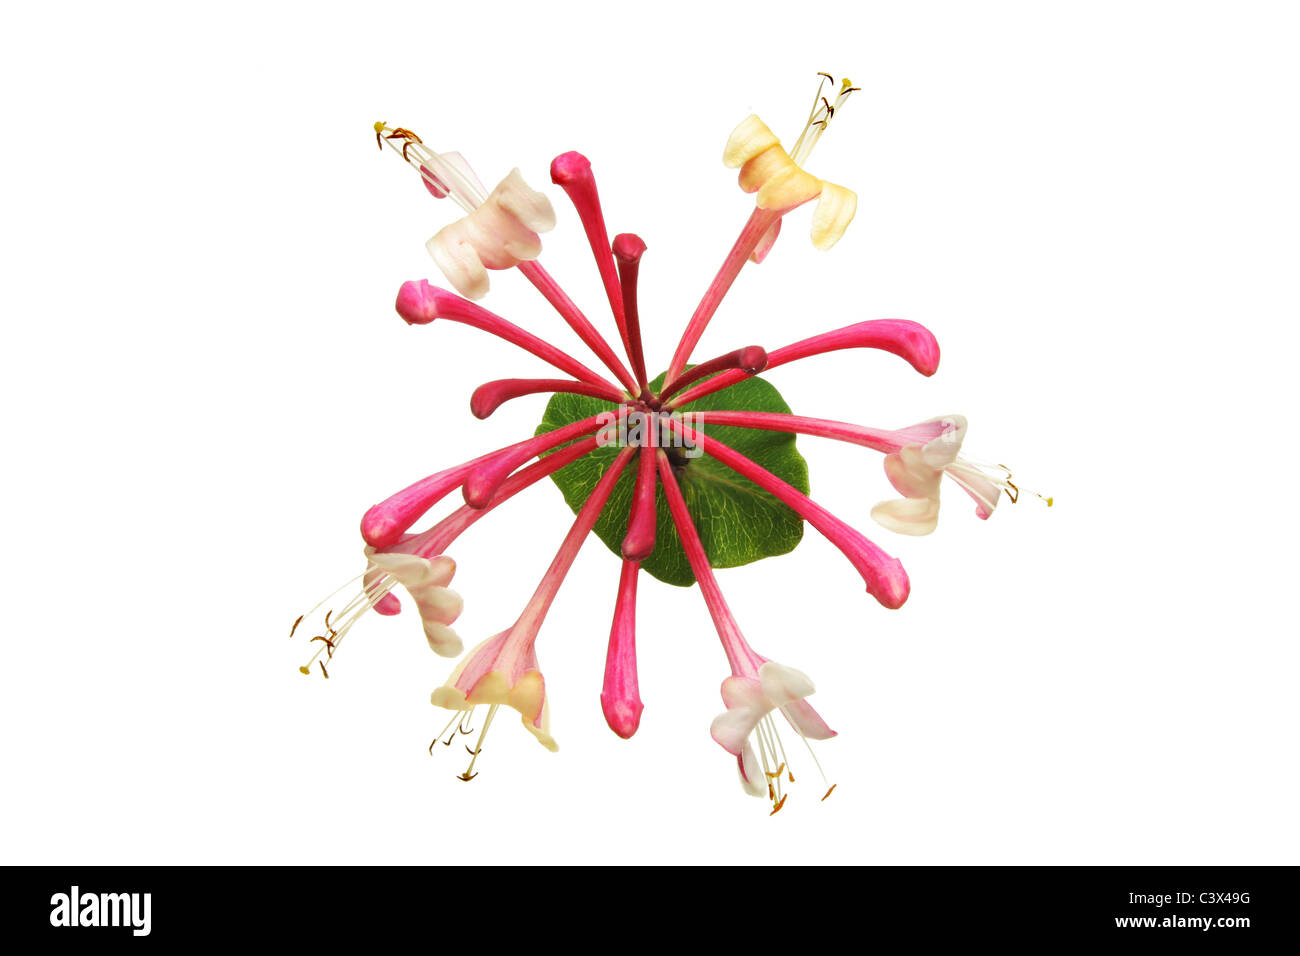 Honeysuckle flower and leaf isolated against white Stock Photo